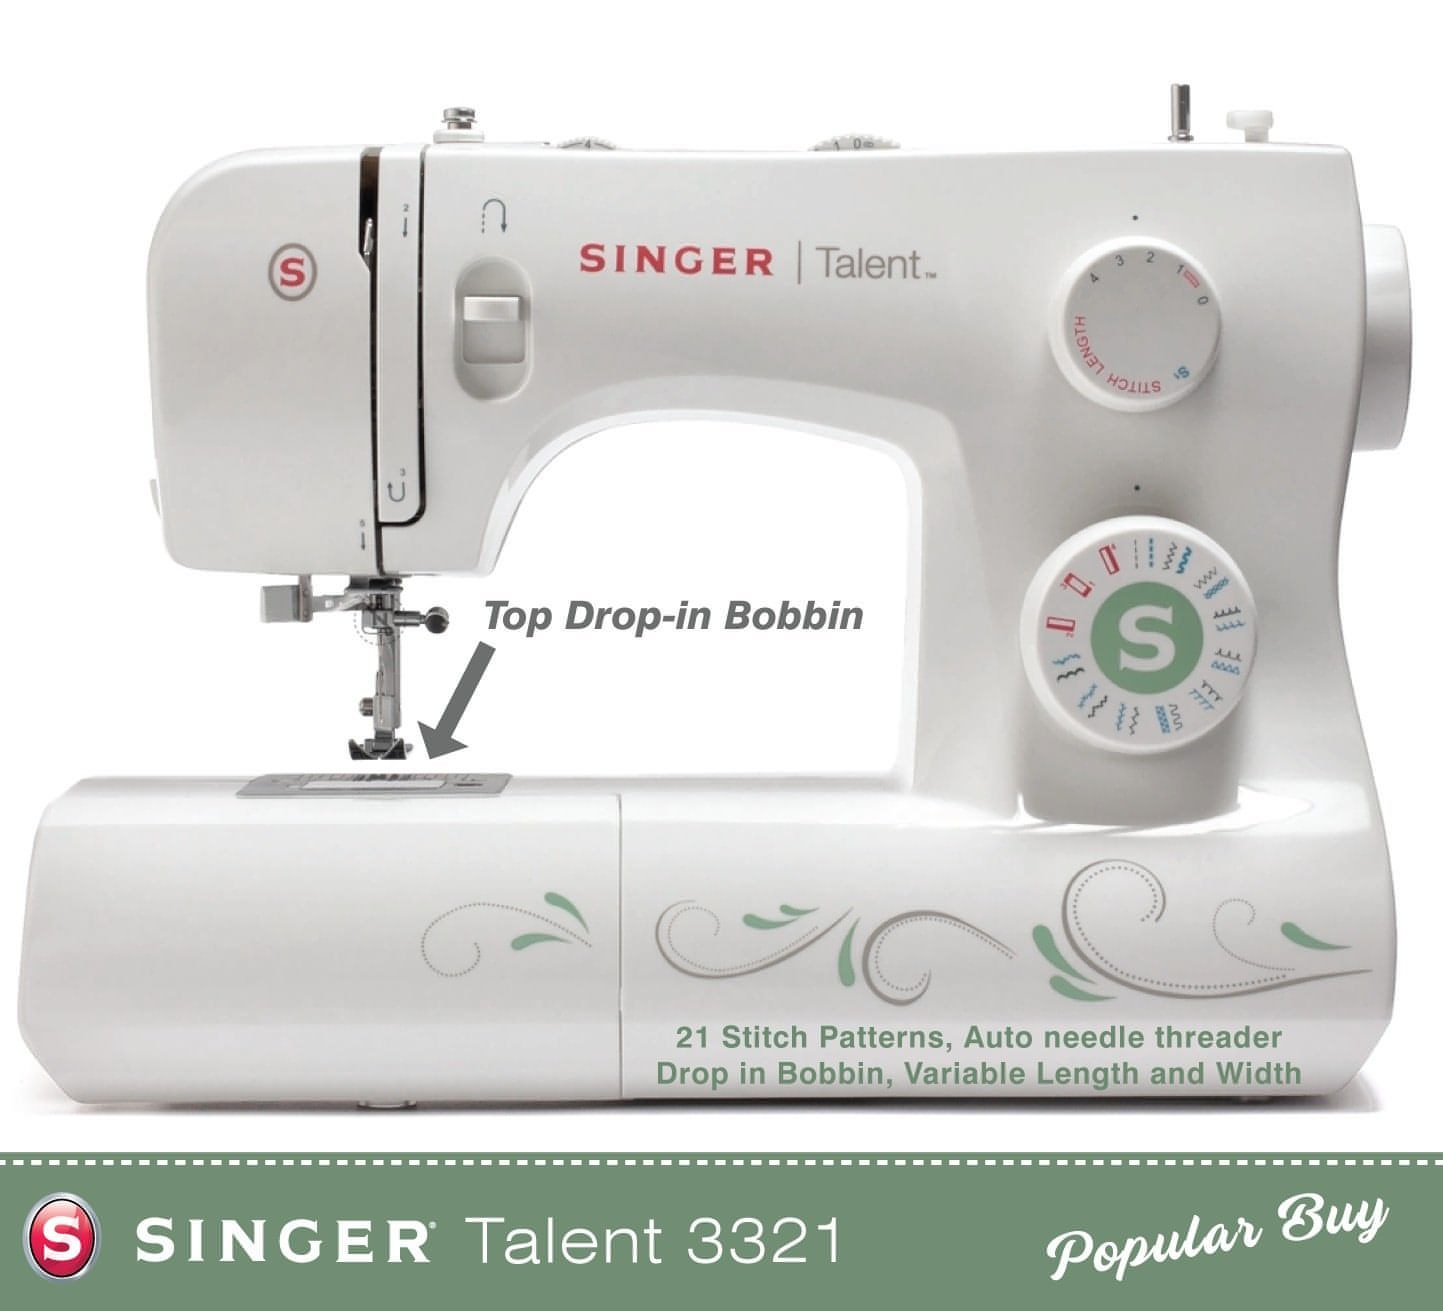 Singer Talent 3321 Sewing Machine  - Free Upgrade to 1 step buttonhole at no extra cost